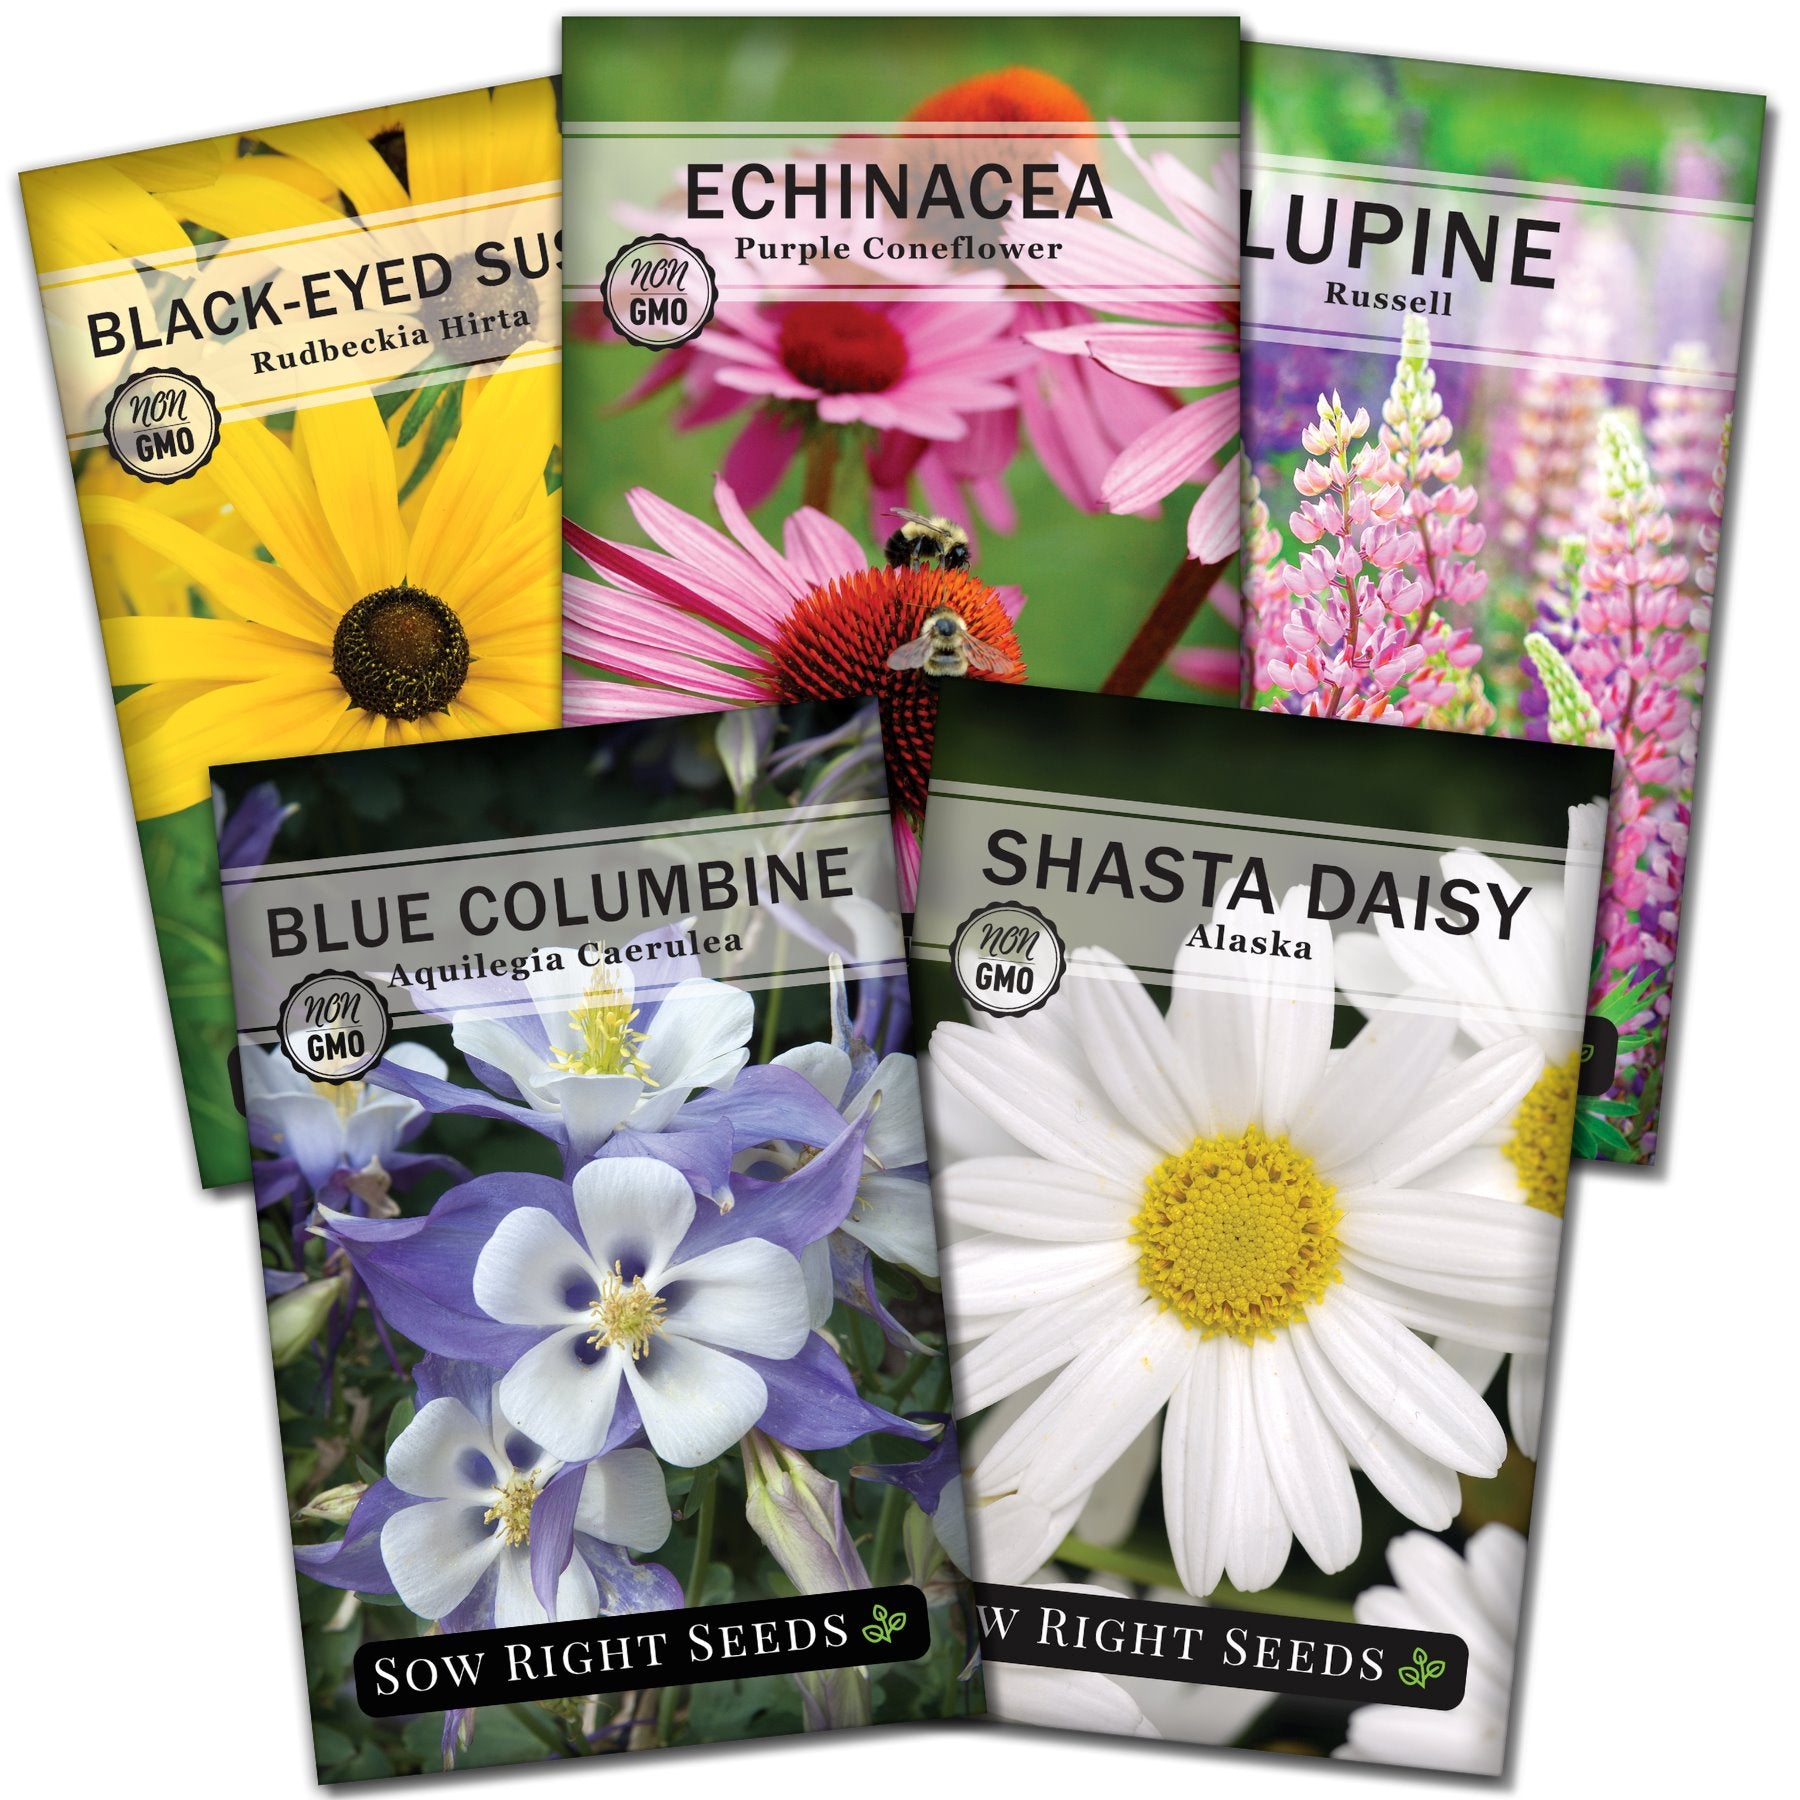 Sow Right Seeds - Flower Seed Garden Collection for Planting - 5 Packets Includes Marigold, Zinnia, Sunflower, Cape Daisy, and Cosmos - Wonderful